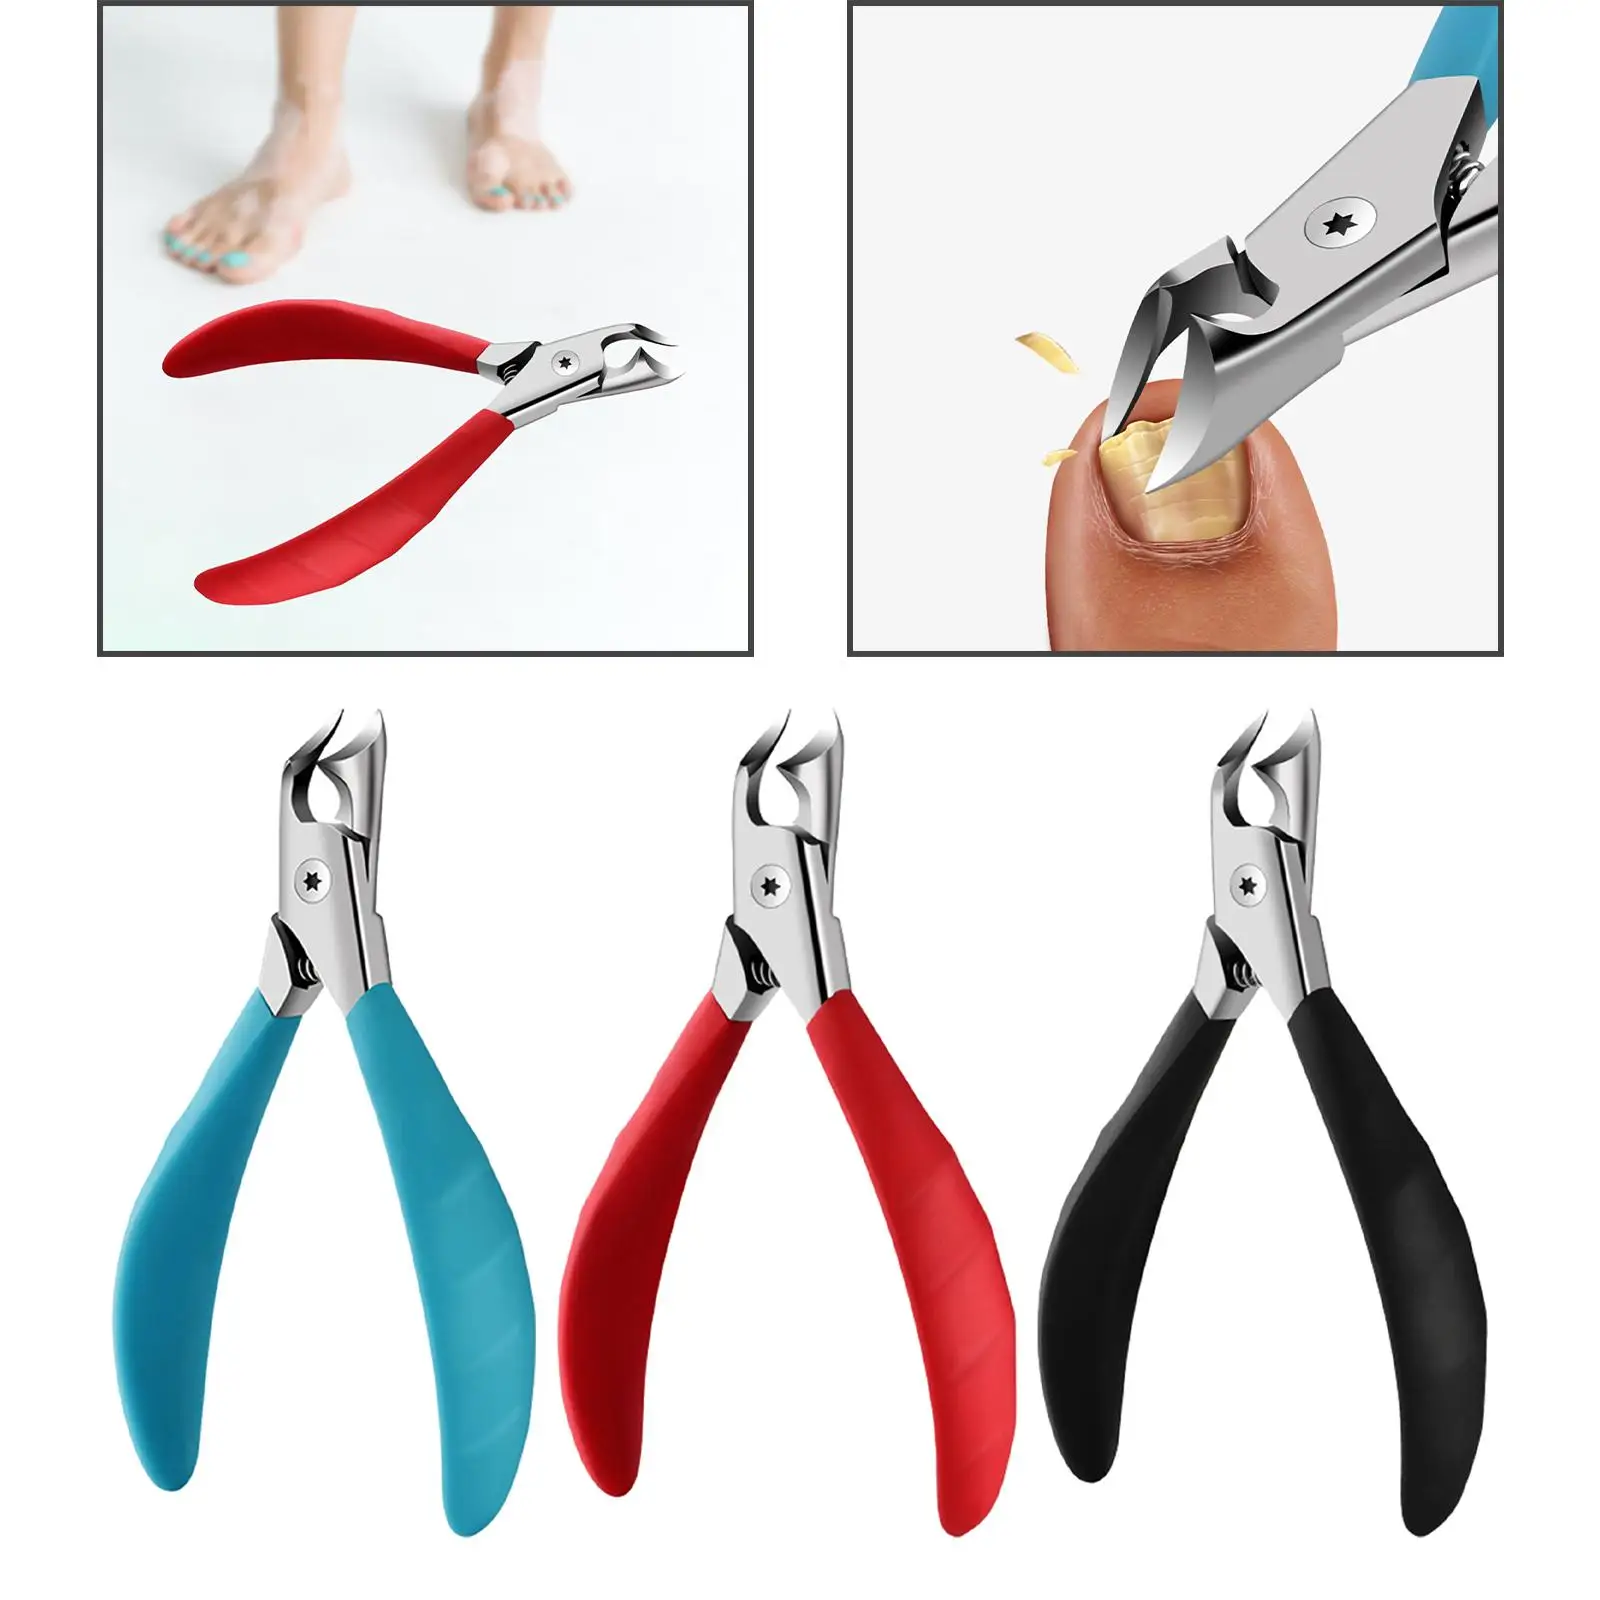 Toenail Clippers with Spring Precision Scissors Curved Nonslip Handle Thick Nails Cutter for Ingrown Toenail Treatment Home SPA